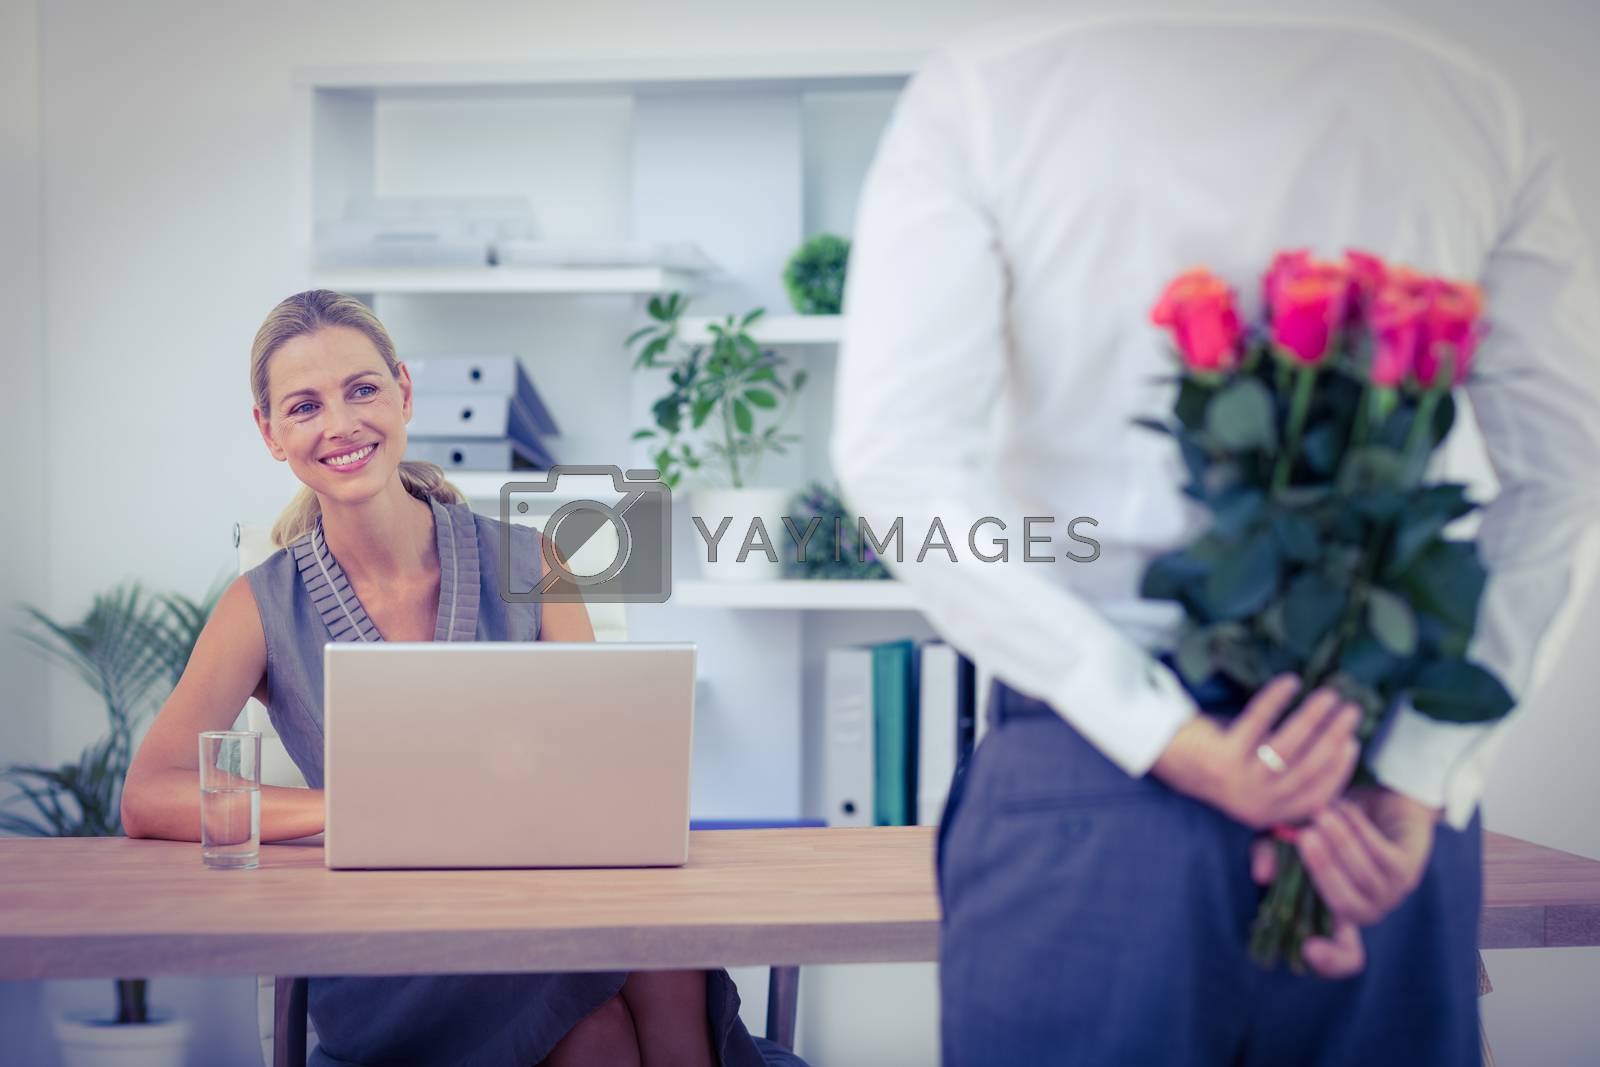 Royalty free image of Man hiding bouquet in front of businesswoman at desk by Wavebreakmedia